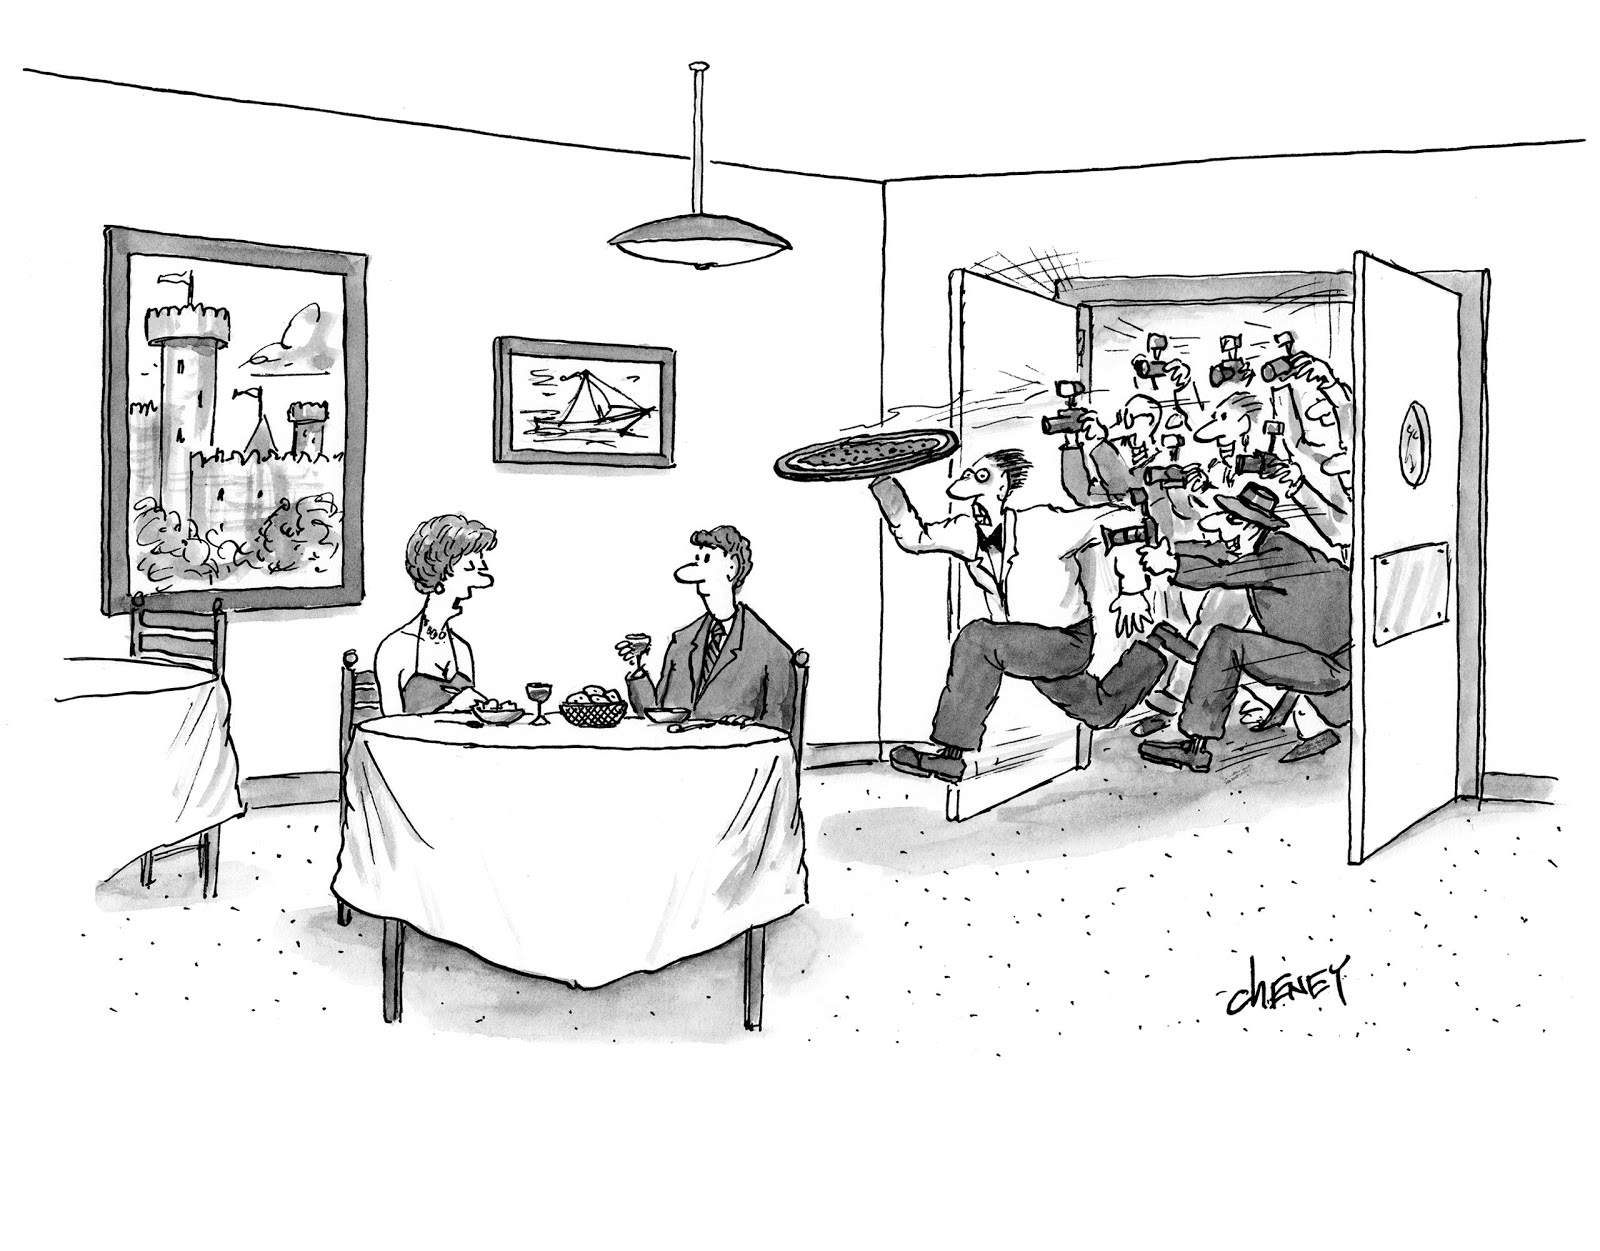 New Yorker Cartoon Caption Contest: Oh My God, A New Yorker Is Our Overlord...